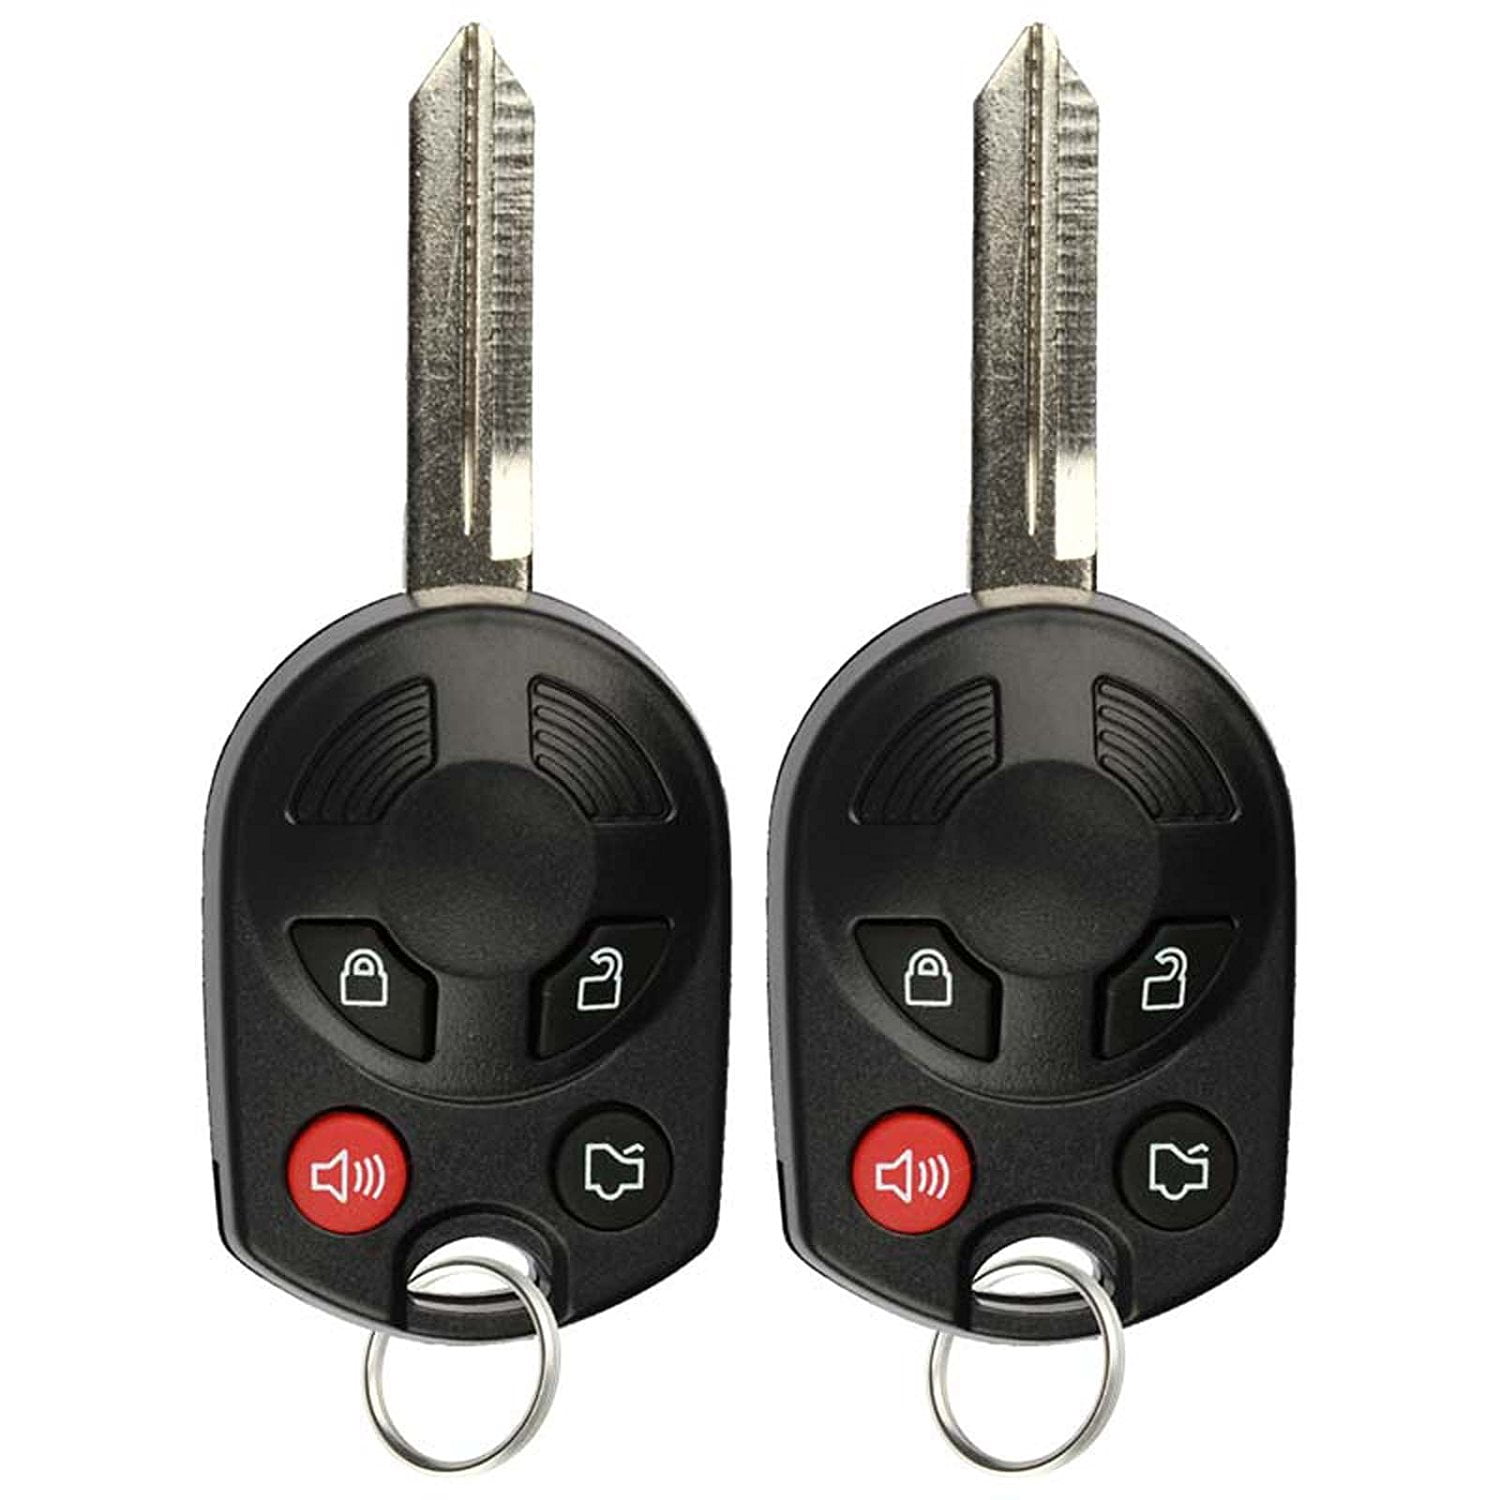 2 New Remote Keyless Entry Replacement 3 Button Key Fob FOR Ford Mercury Lincoln